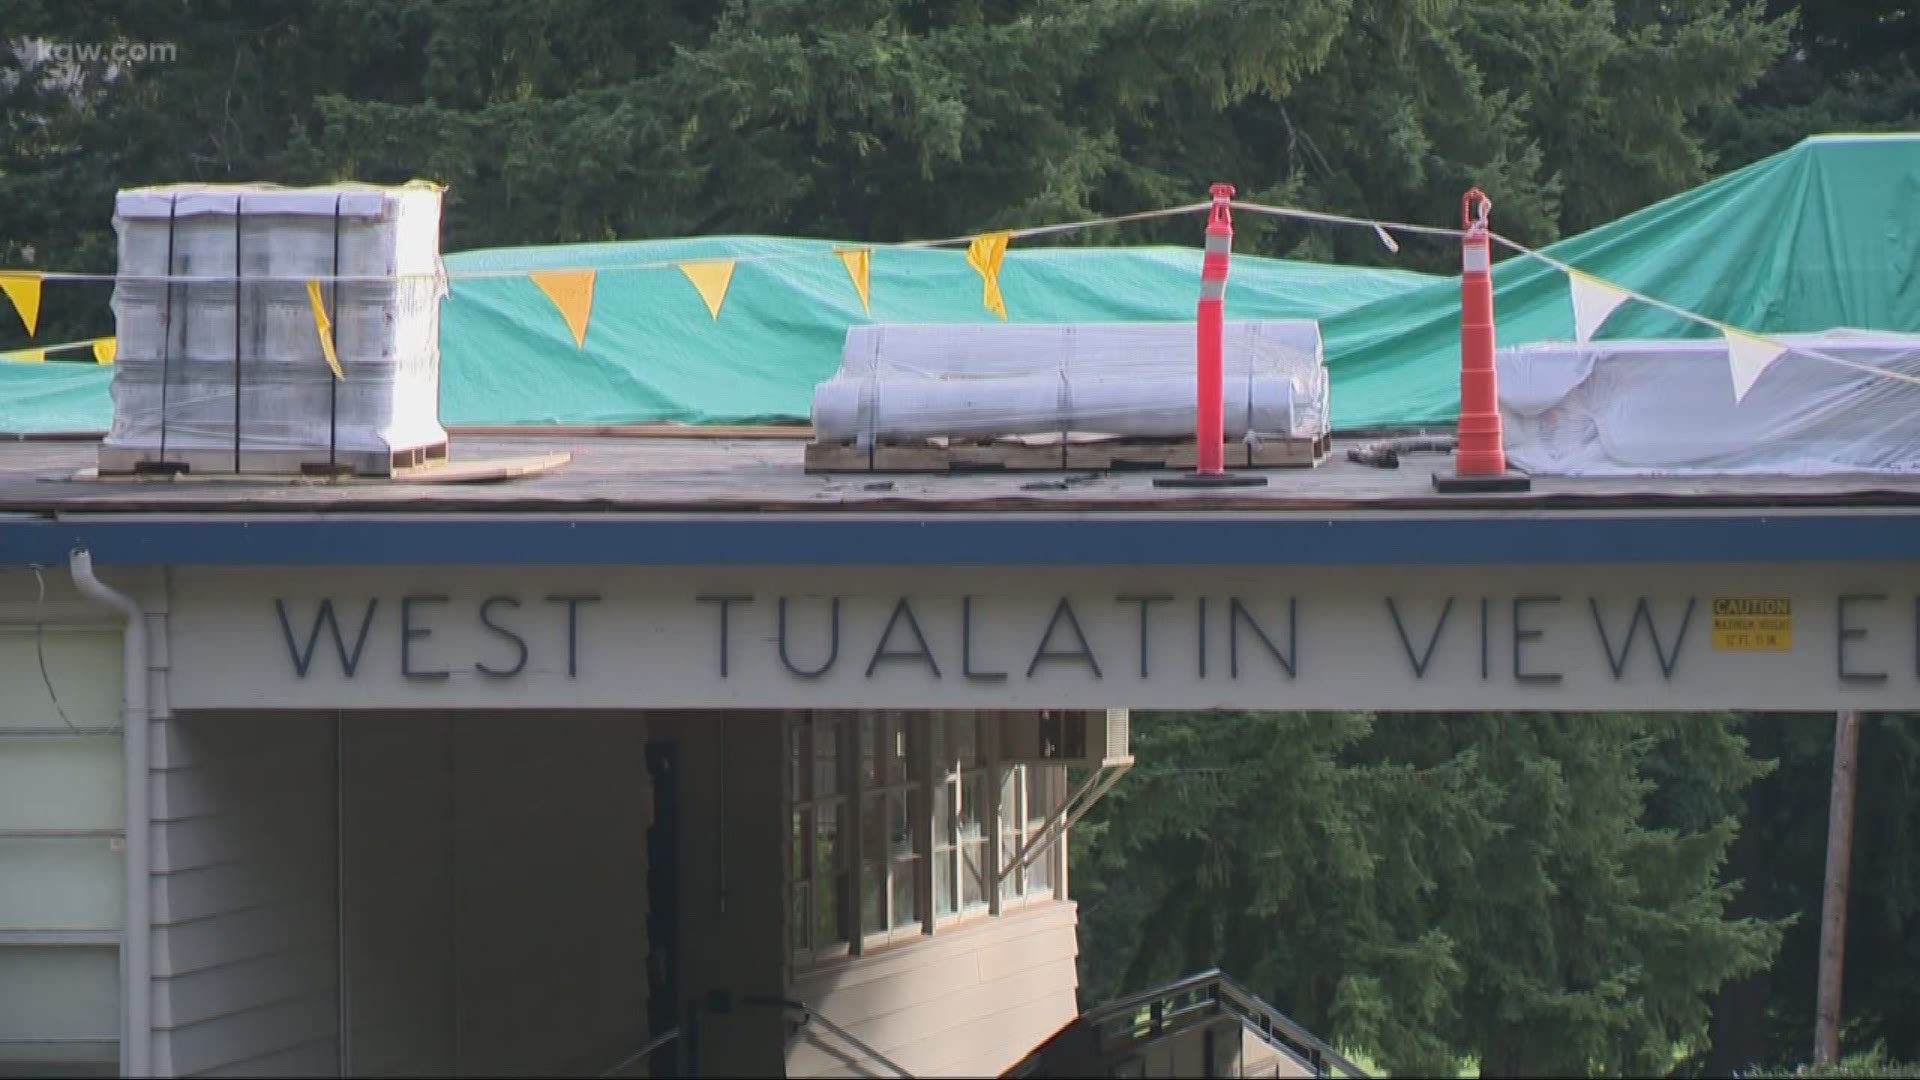 Tualatin elementary school will send students to other schools while it repairs water damage